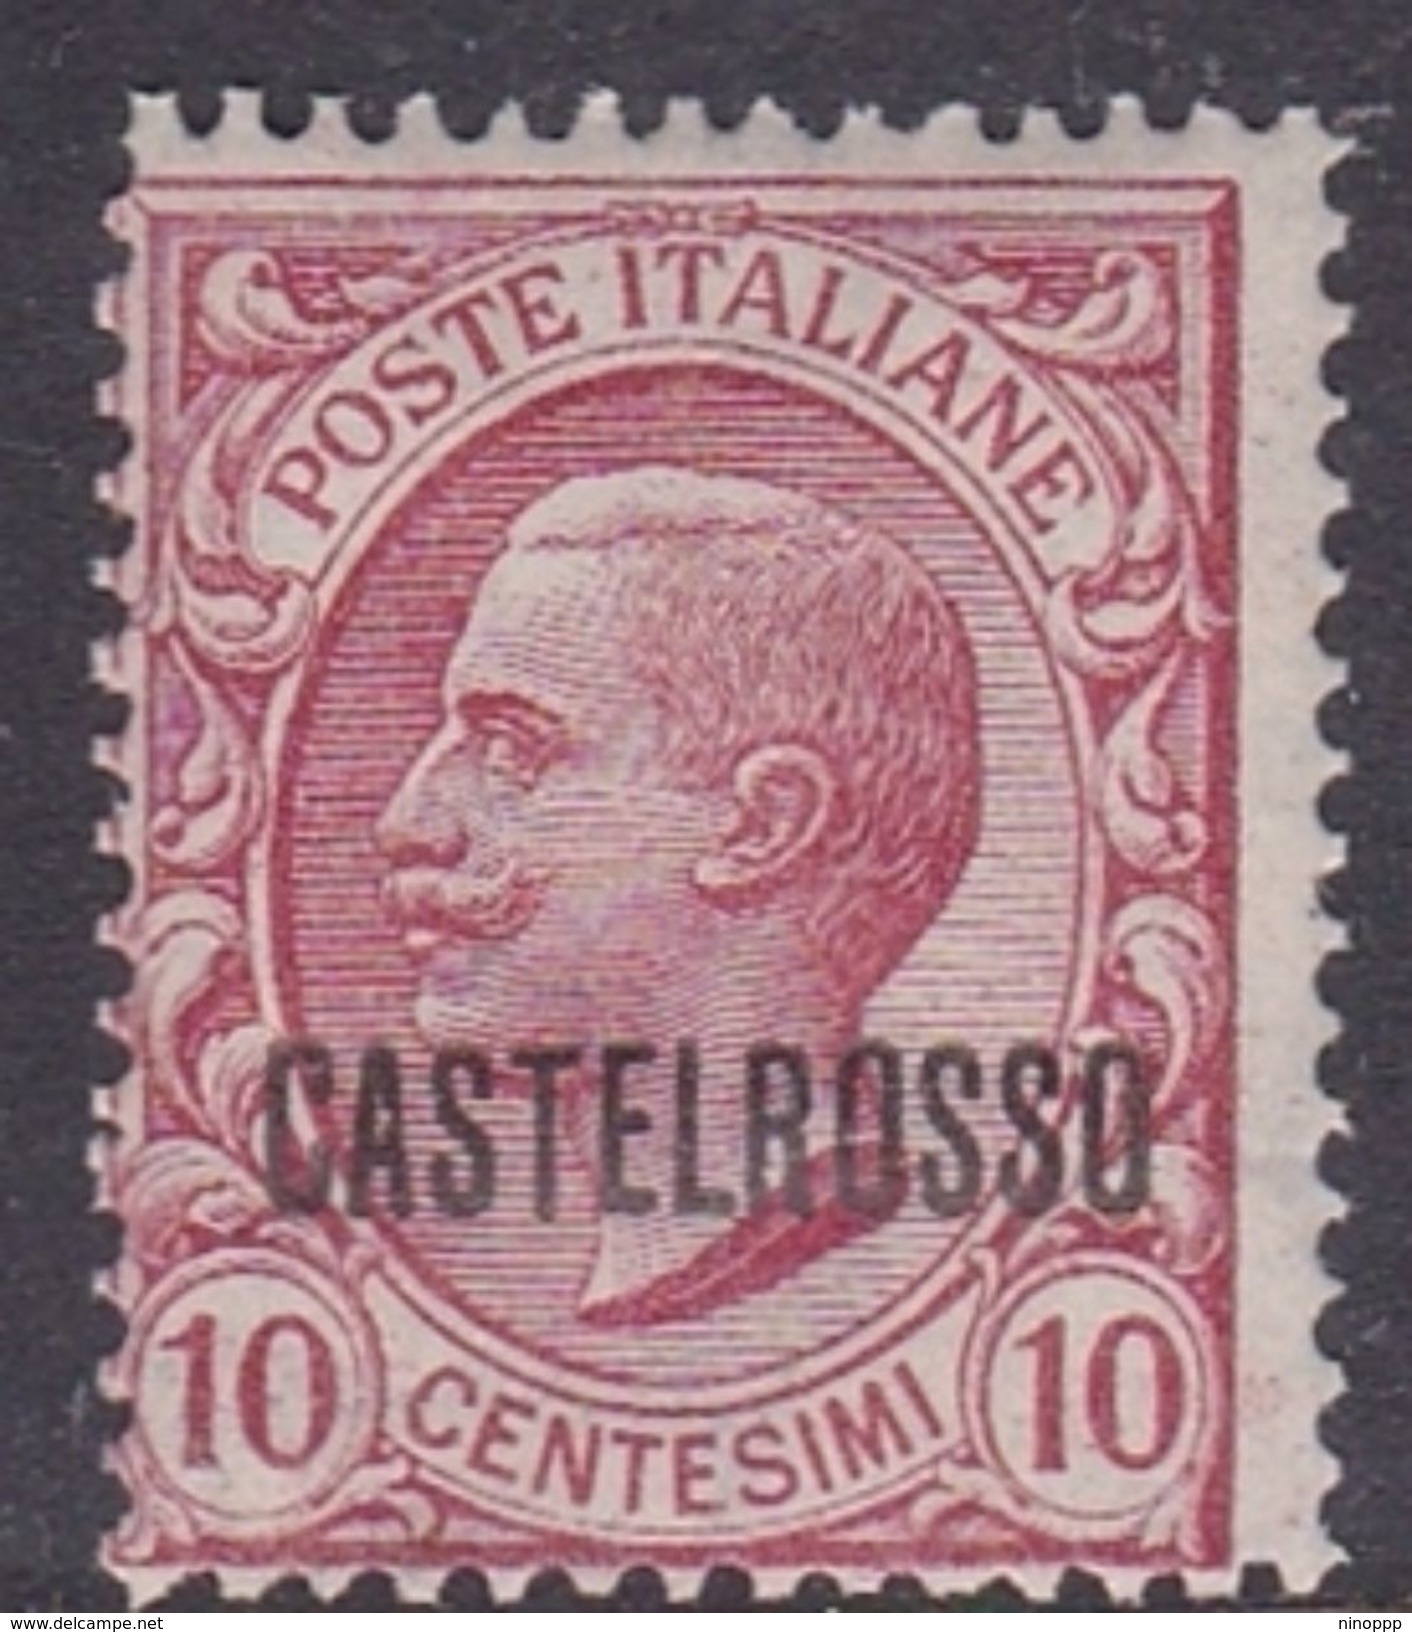 Italy-Colonies And Territories-Castelrosso S2 1922 10c Rose MNH - Emissioni Generali